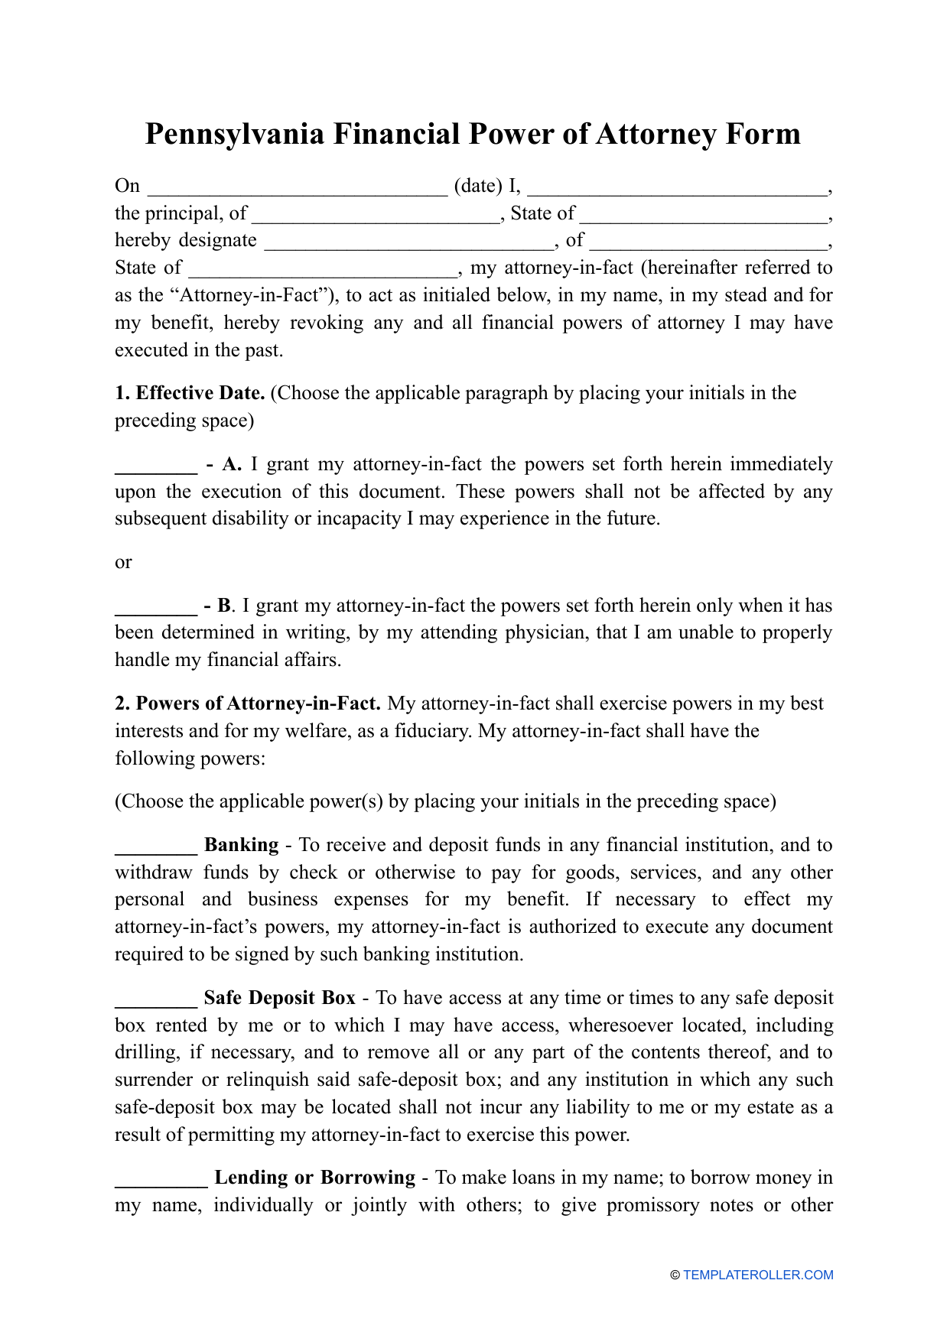 Financial Power of Attorney Form - Pennsylvania, Page 1